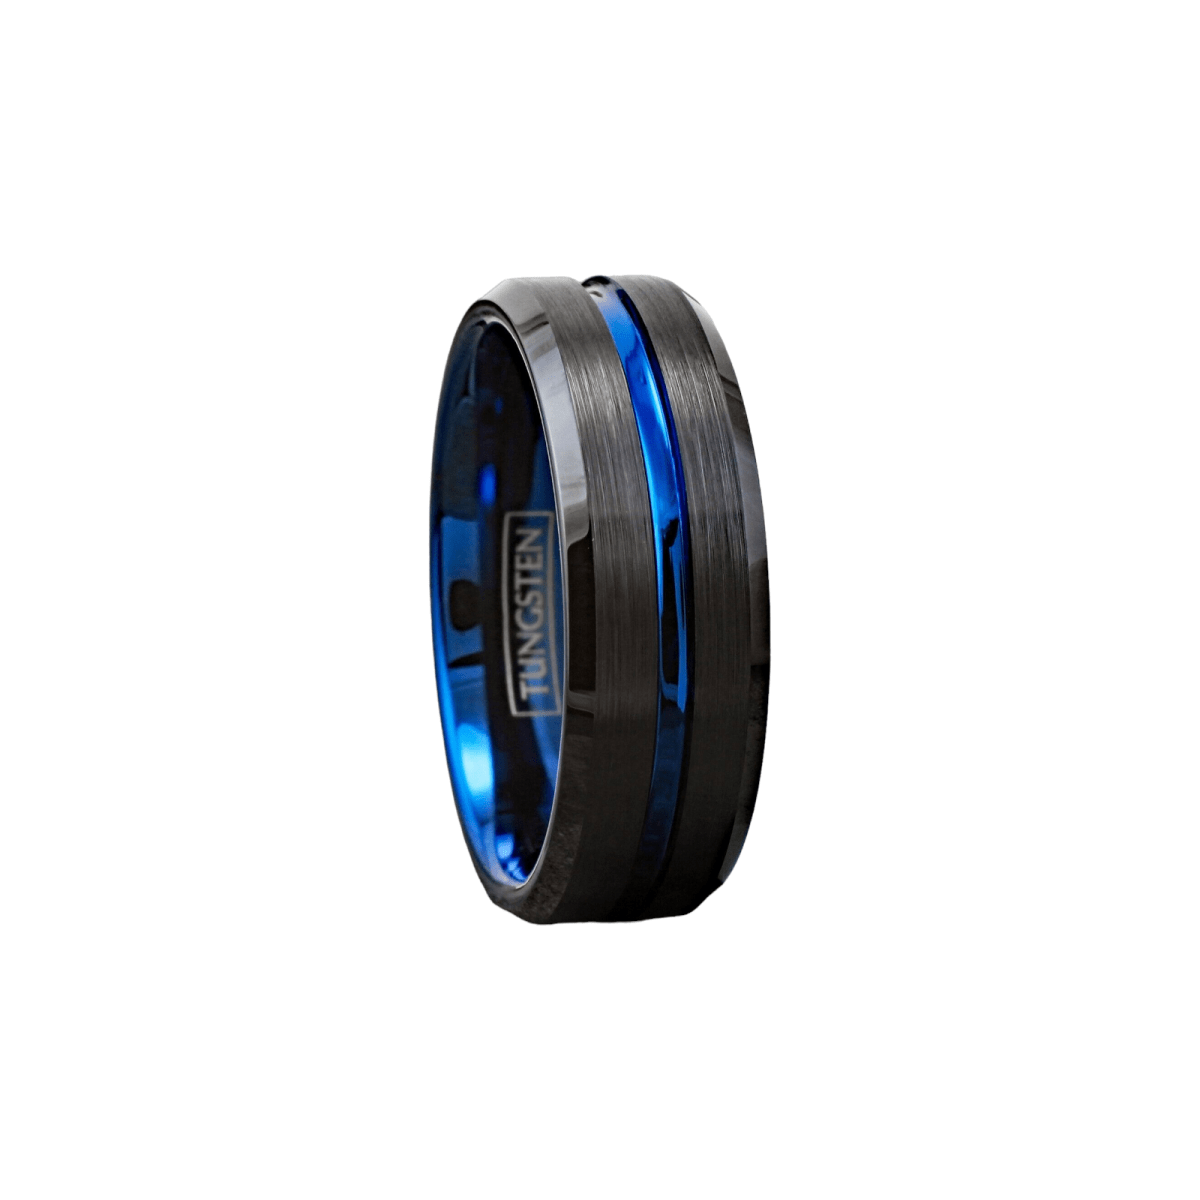 Thin blue line wedding ring with black beveled edges and a blue inner sleeve.